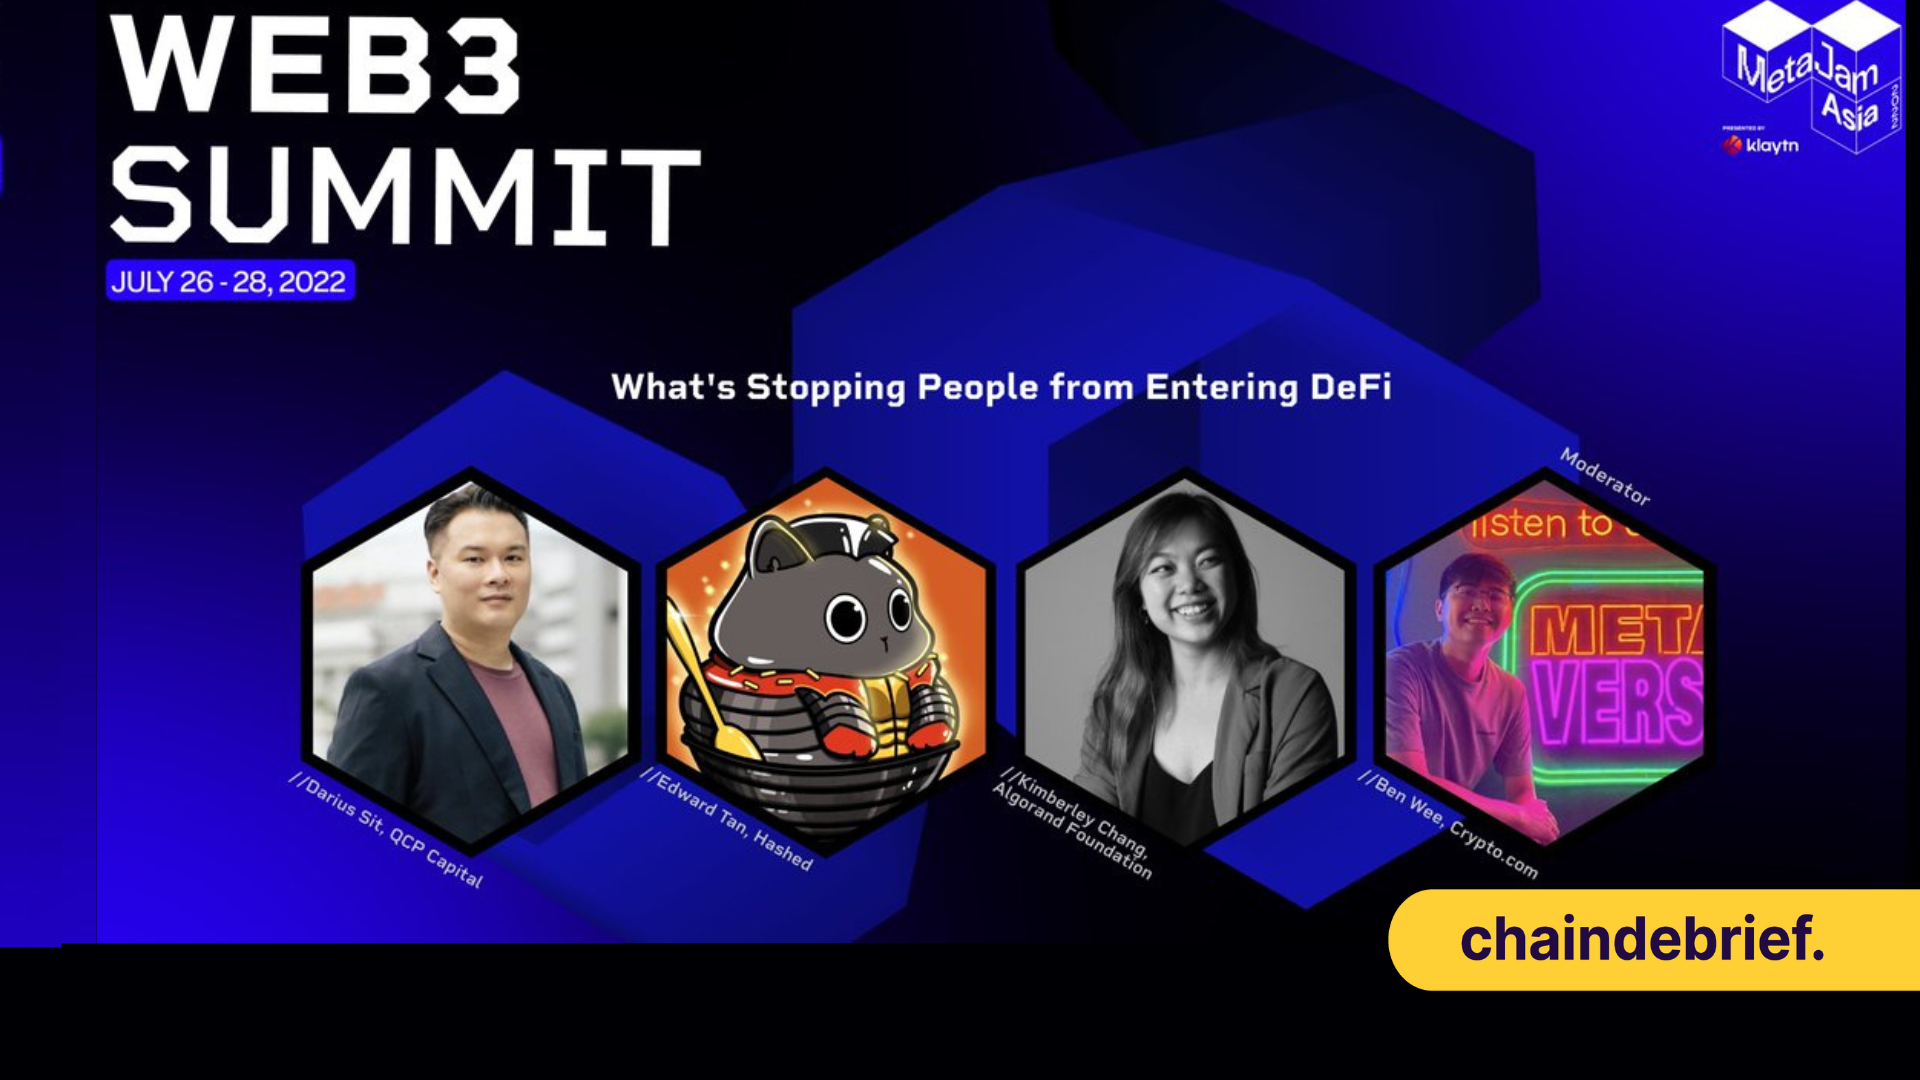 MetaJam Asia: What’s Stopping People From Entering DeFi?